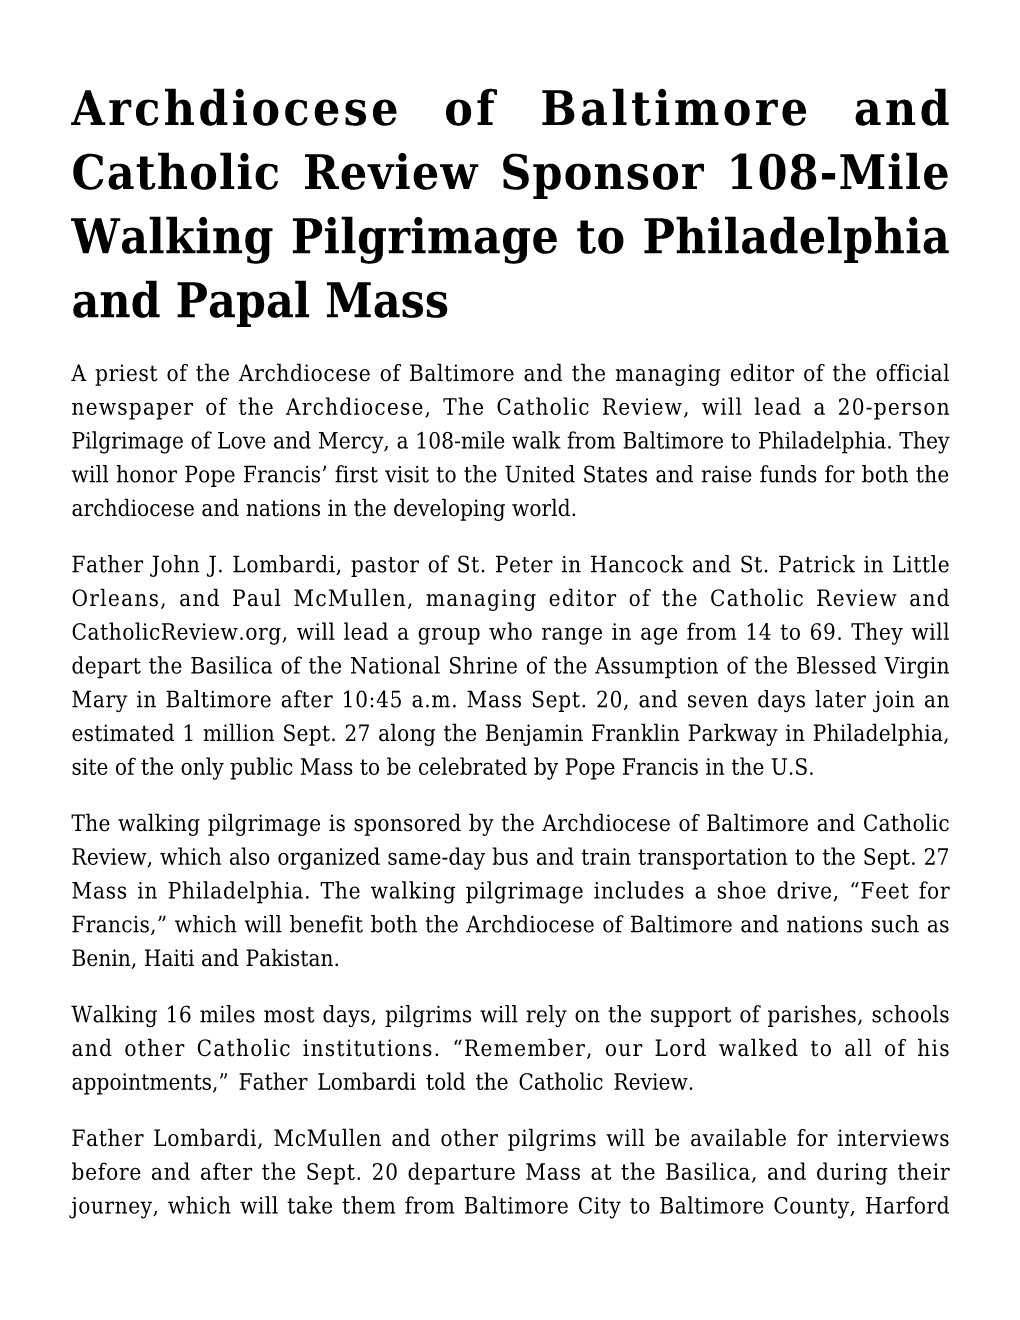 Archdiocese of Baltimore and Catholic Review Sponsor 108-Mile Walking Pilgrimage to Philadelphia and Papal Mass